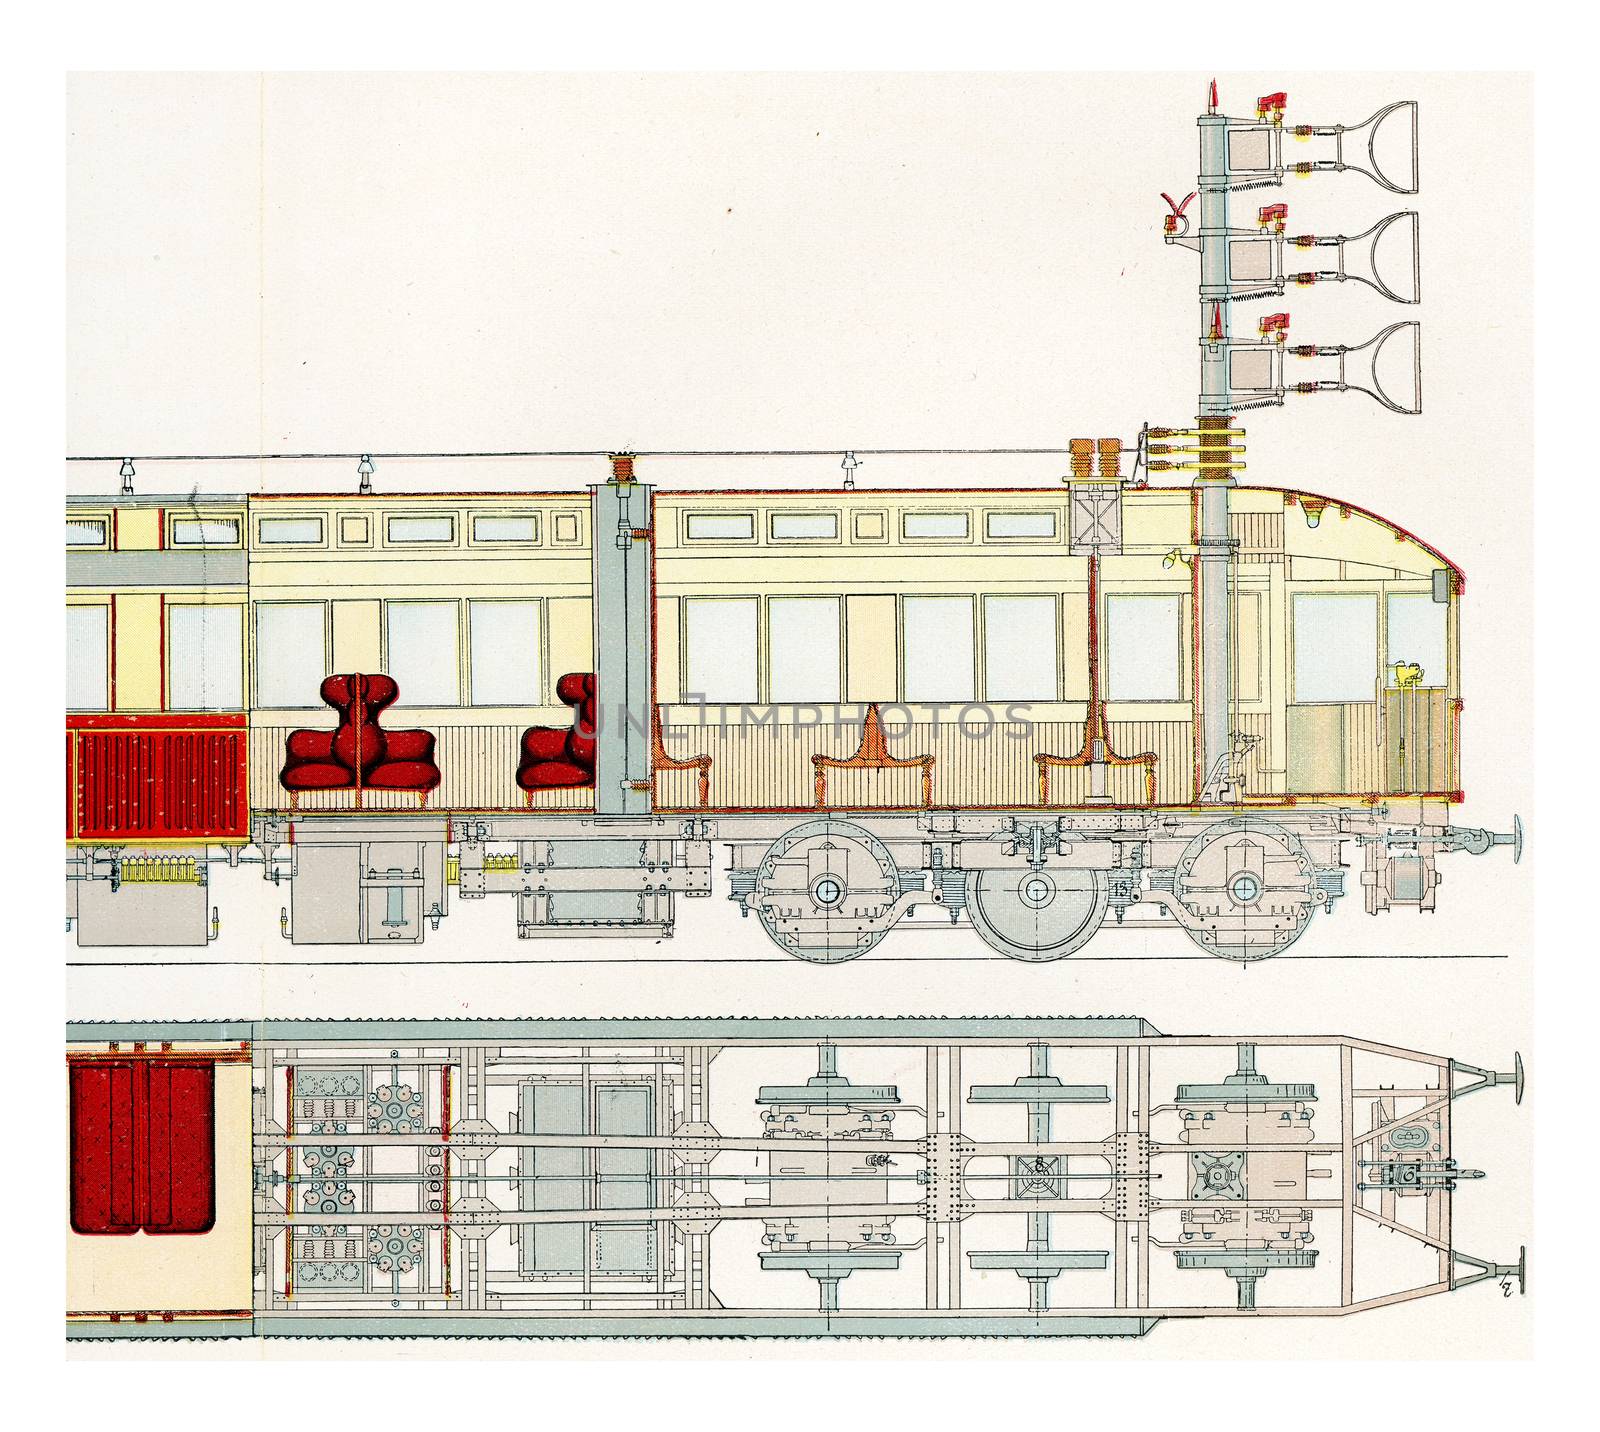 Section of a motor car fast test railway Marienfelde-Zossen, vintage engraved illustration. From the Universe and Humanity, 1910.
